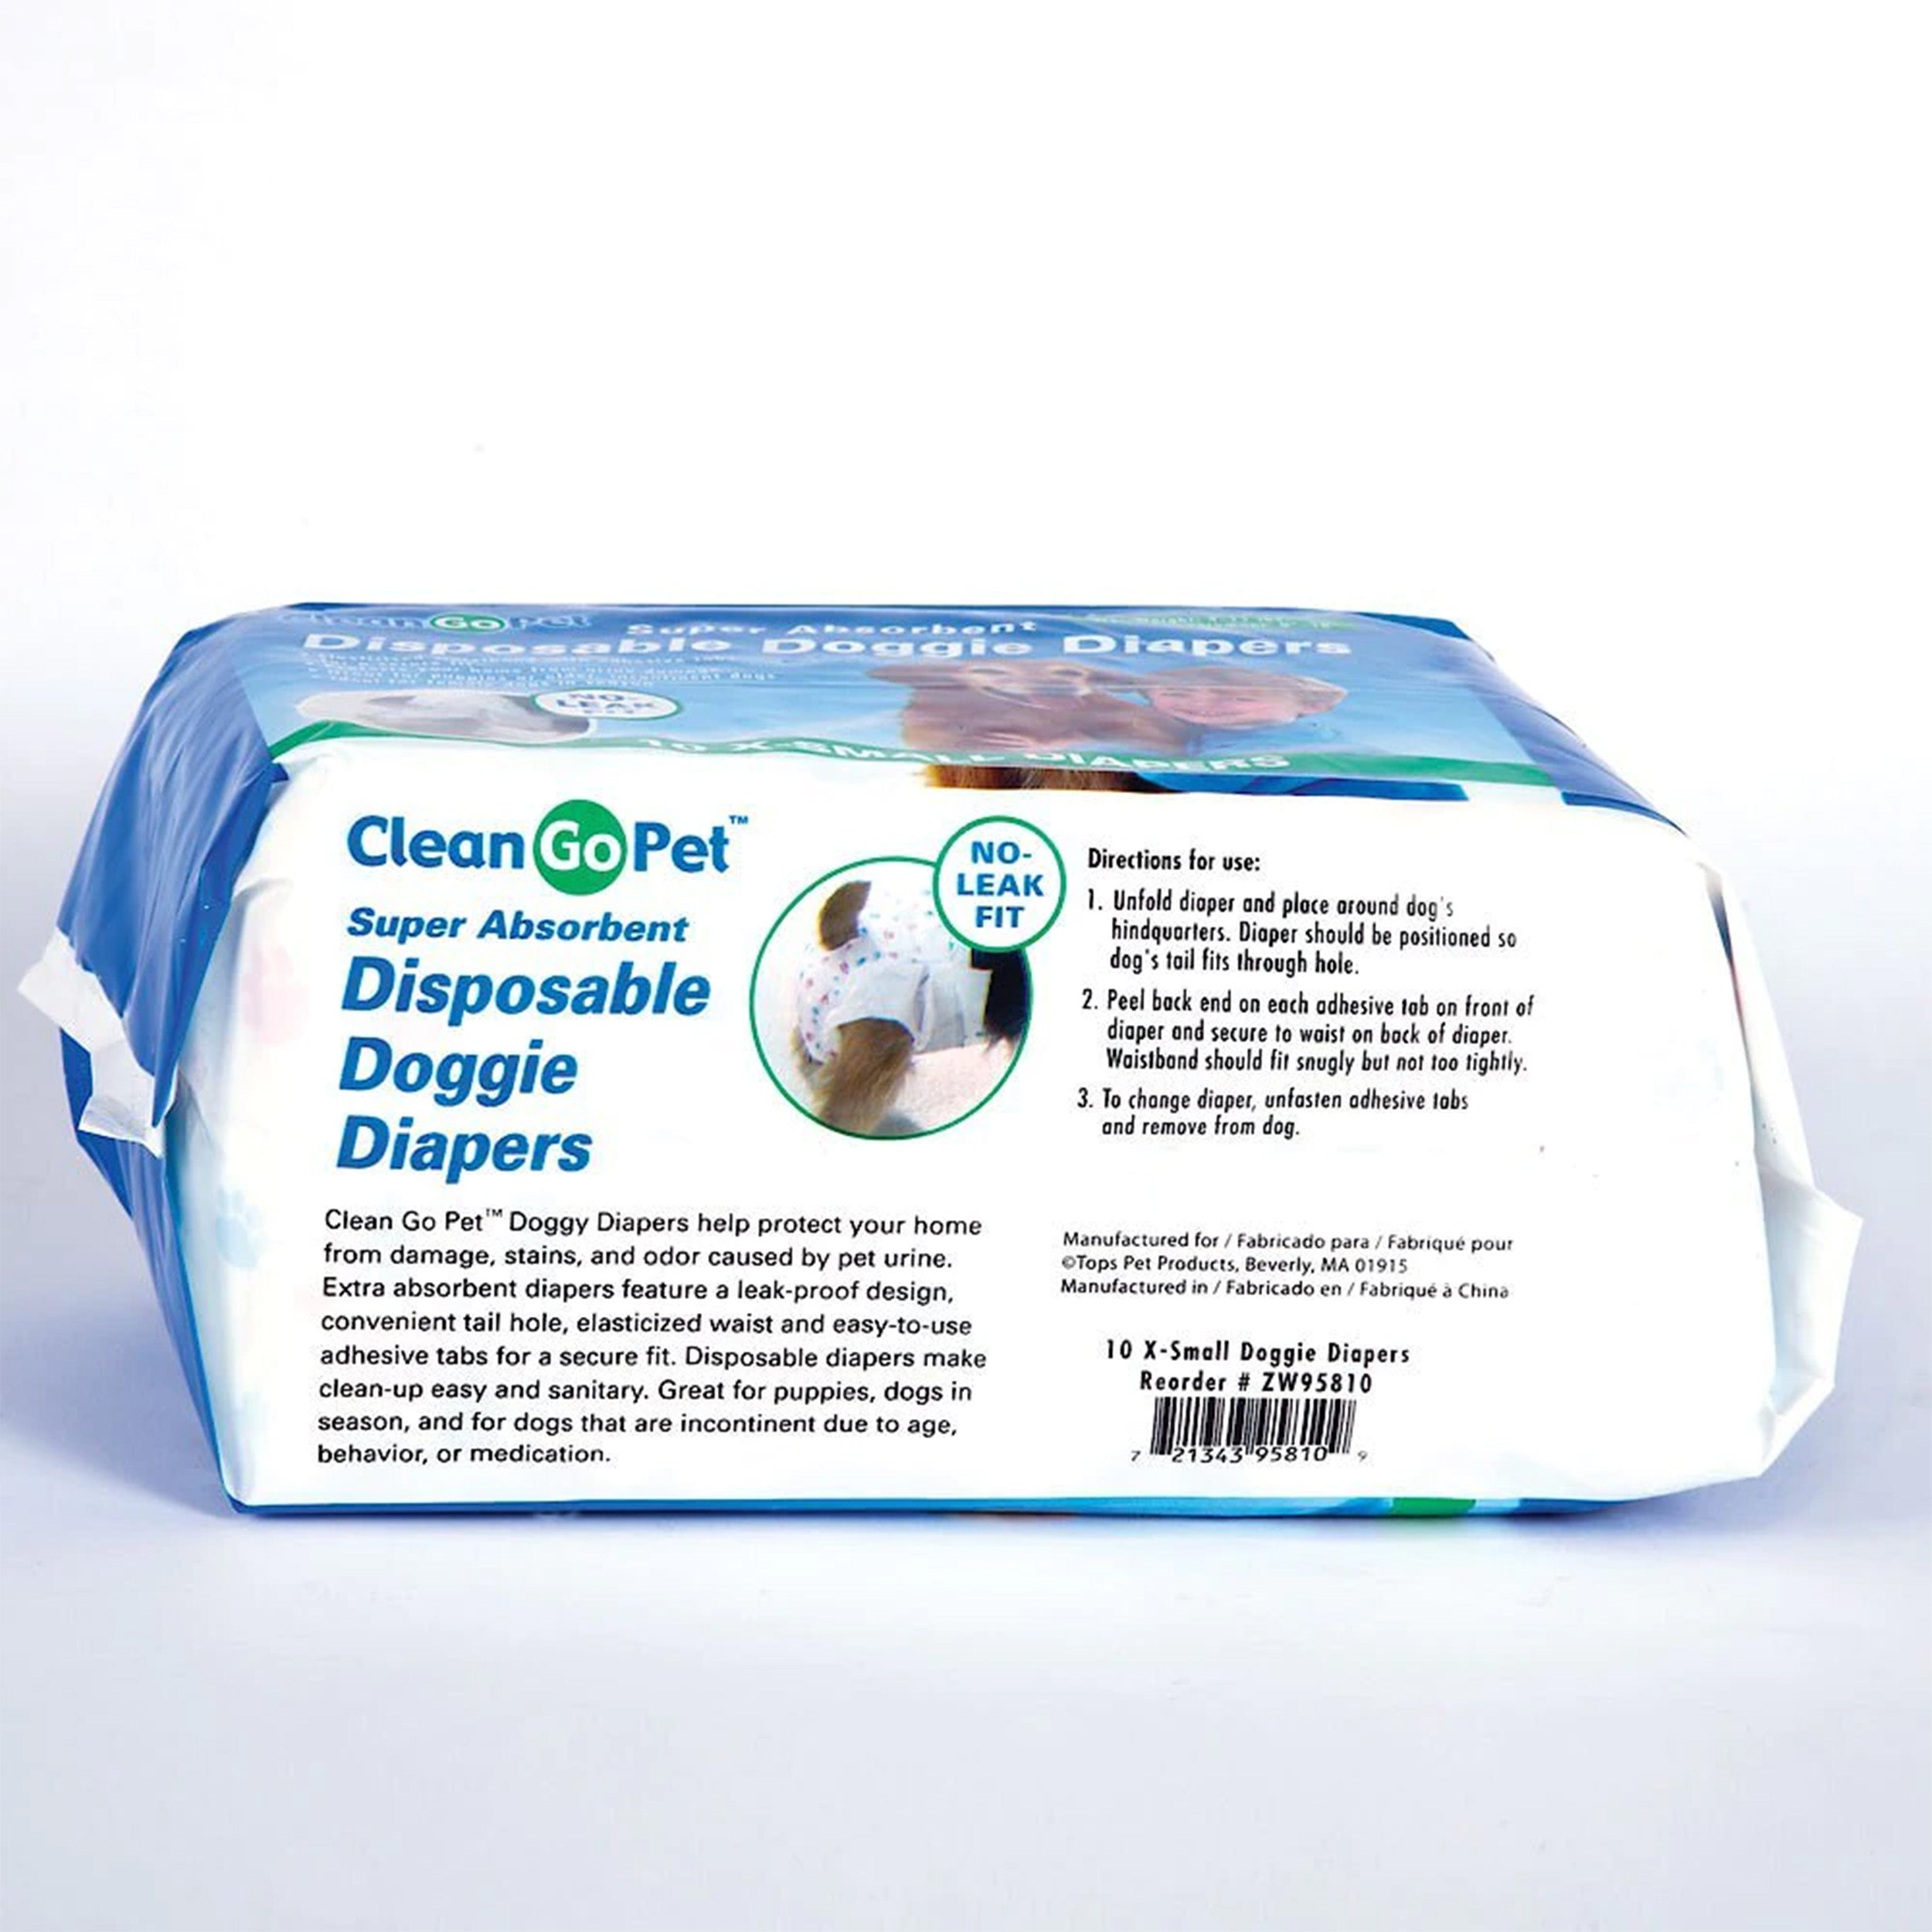 CleanGoPet Super Absorbent Disposable Doggy Diapers